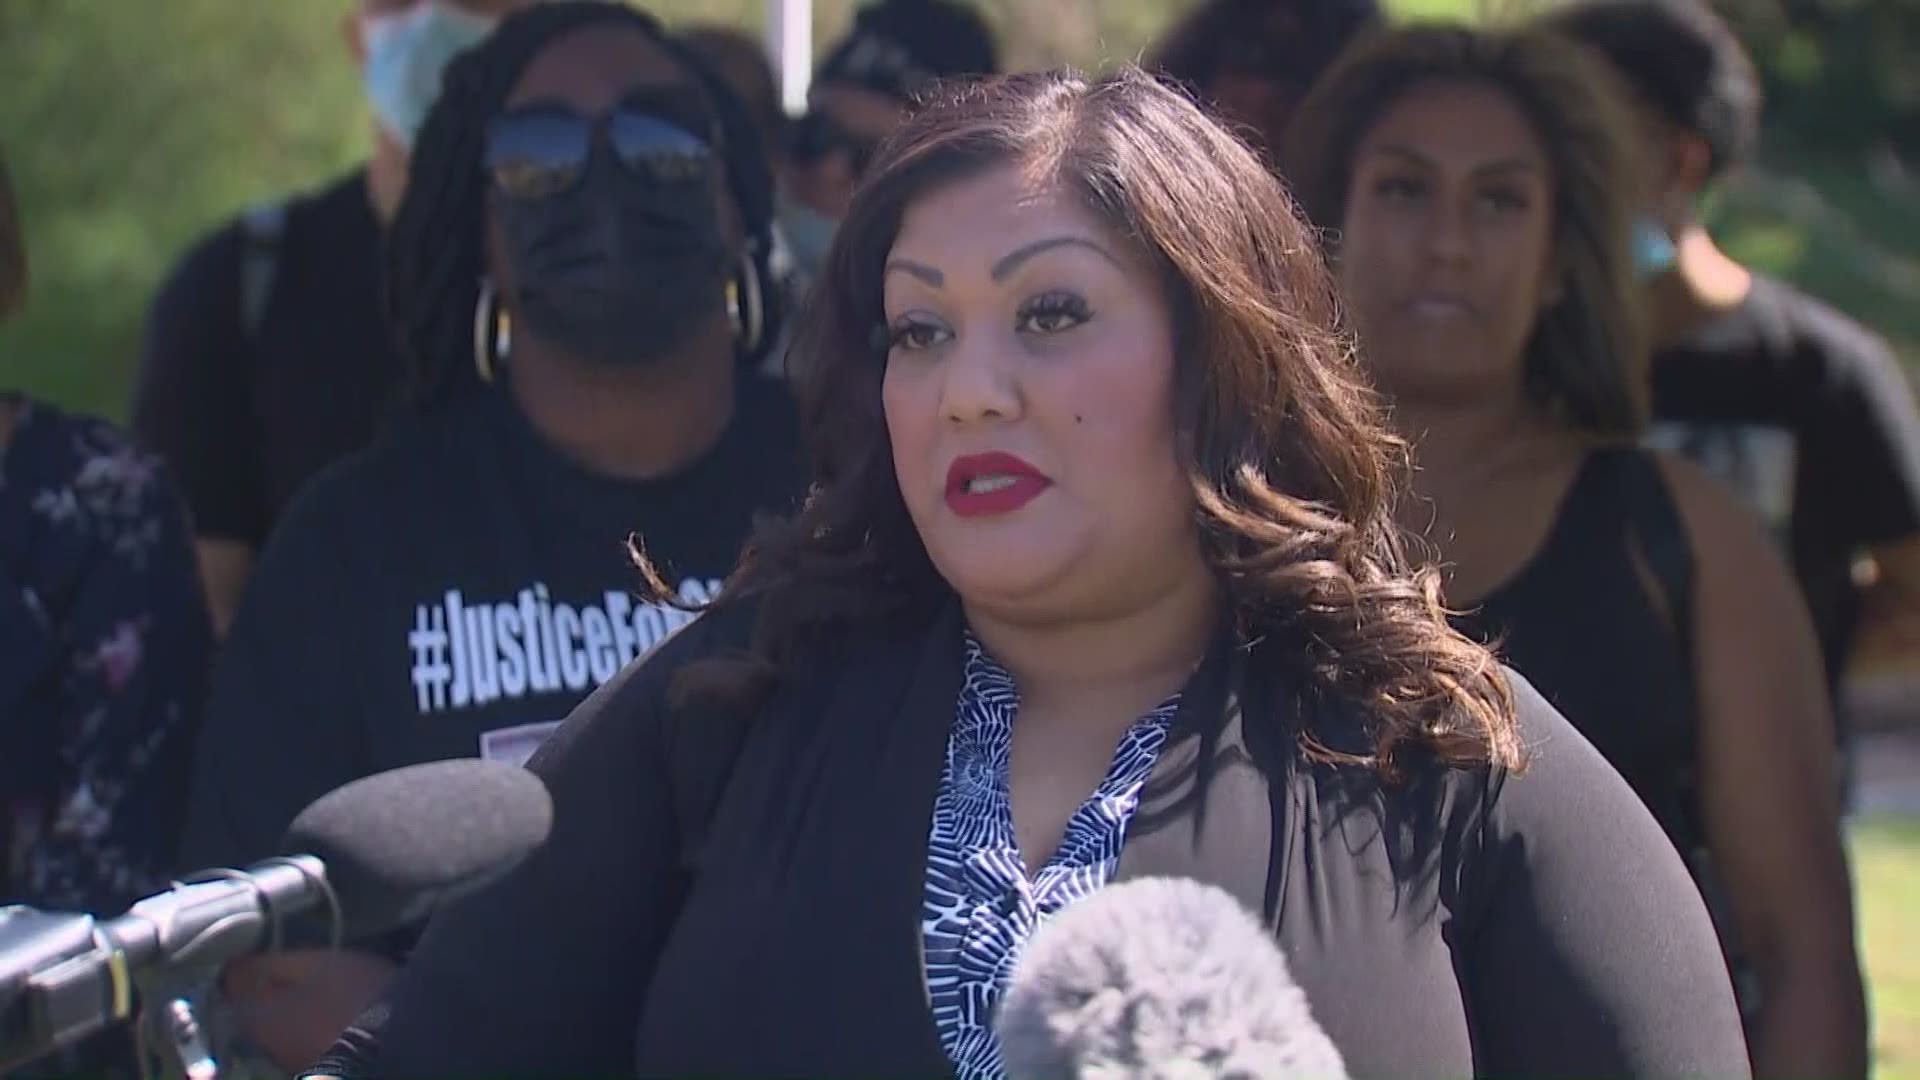 Sonia Joseph, the mother of Giovonn Joseph-McDade, who was killed by police in 2017, speaks after the family settled with the city of Kent for $4.4 million.